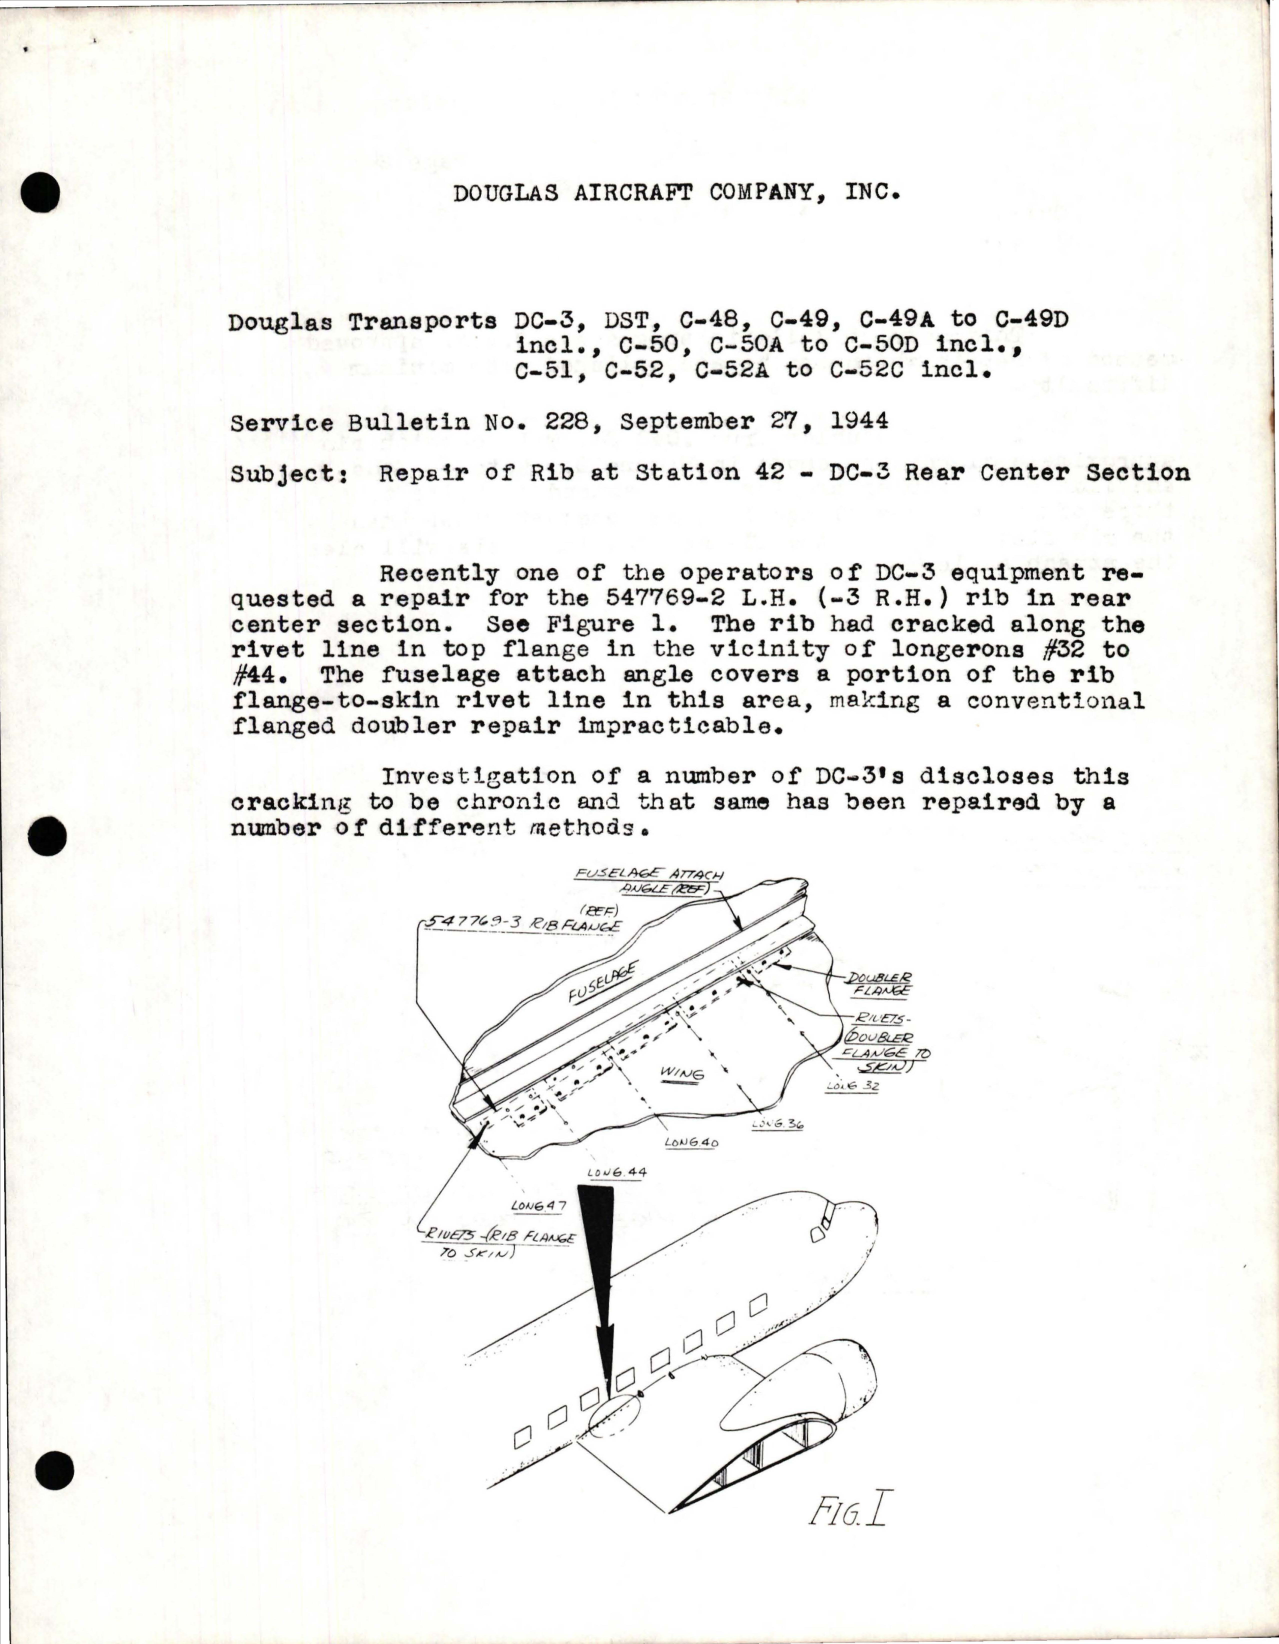 Sample page 1 from AirCorps Library document: Repair of Rib at Station 42 - DC-3 Rear Center Section